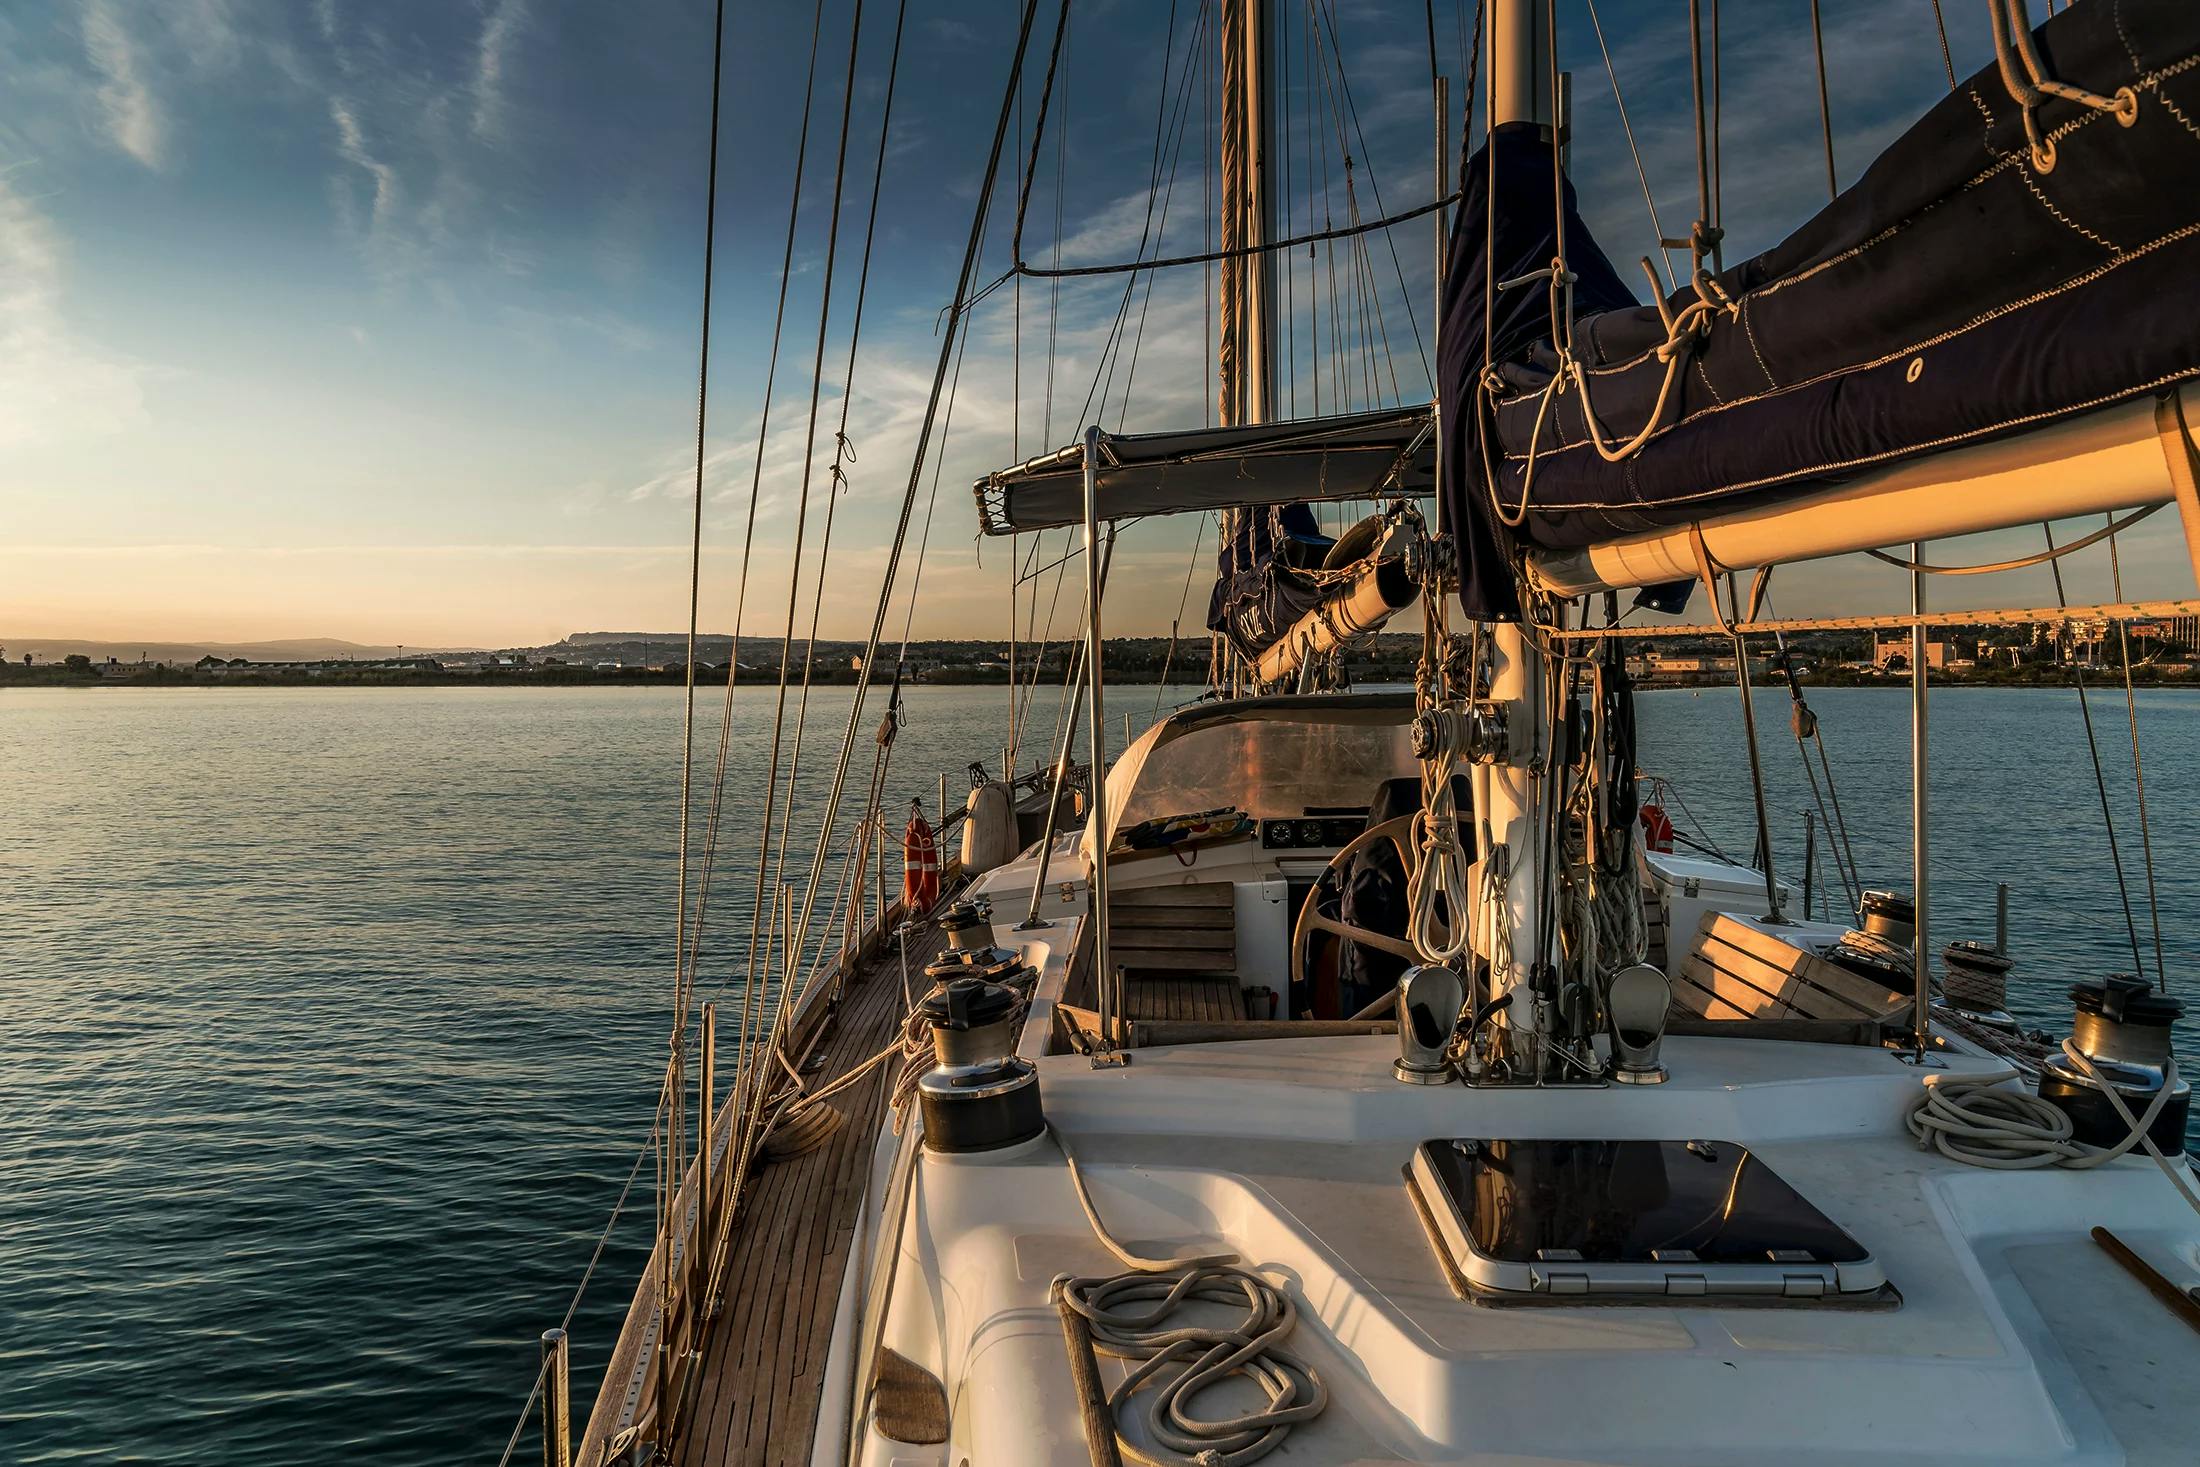 IYT Sailing Practice and certification. undefined. Training for an international license for the captain of a sailing yacht Bareboat Captain Skipper according to the IYT system